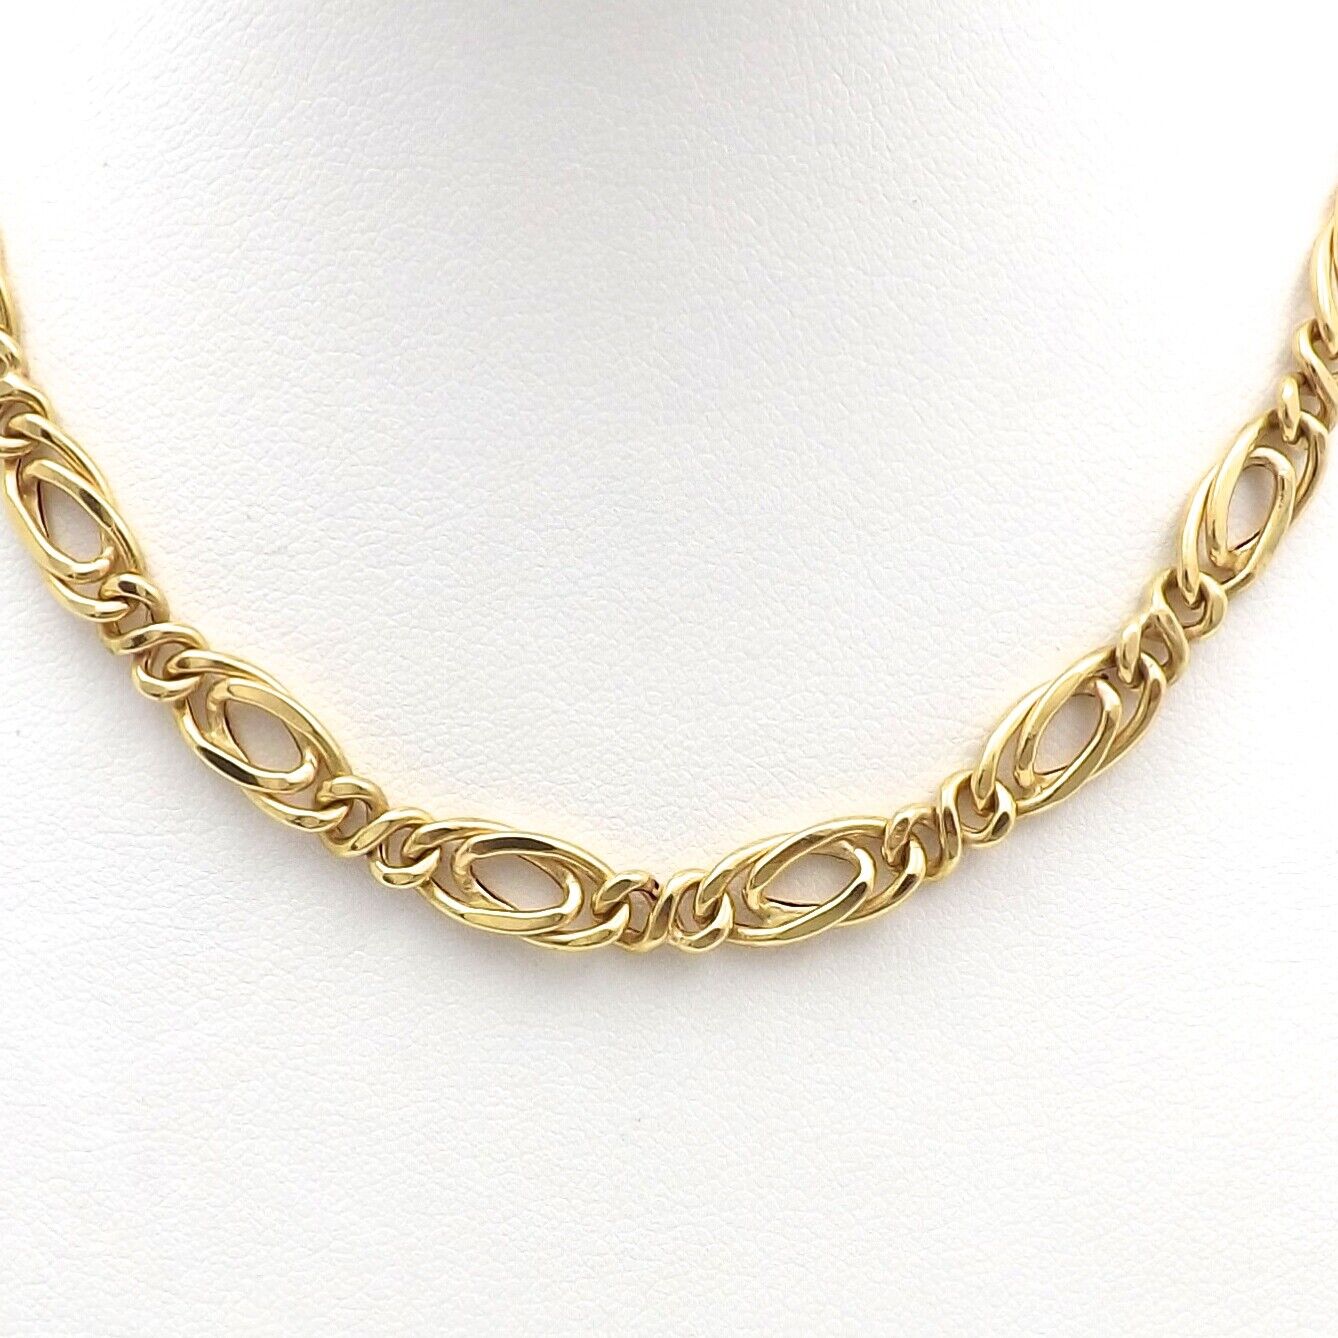 New 18k Gold 750 Italy Oval Tiger Eye Curb Infinity Link Chain 